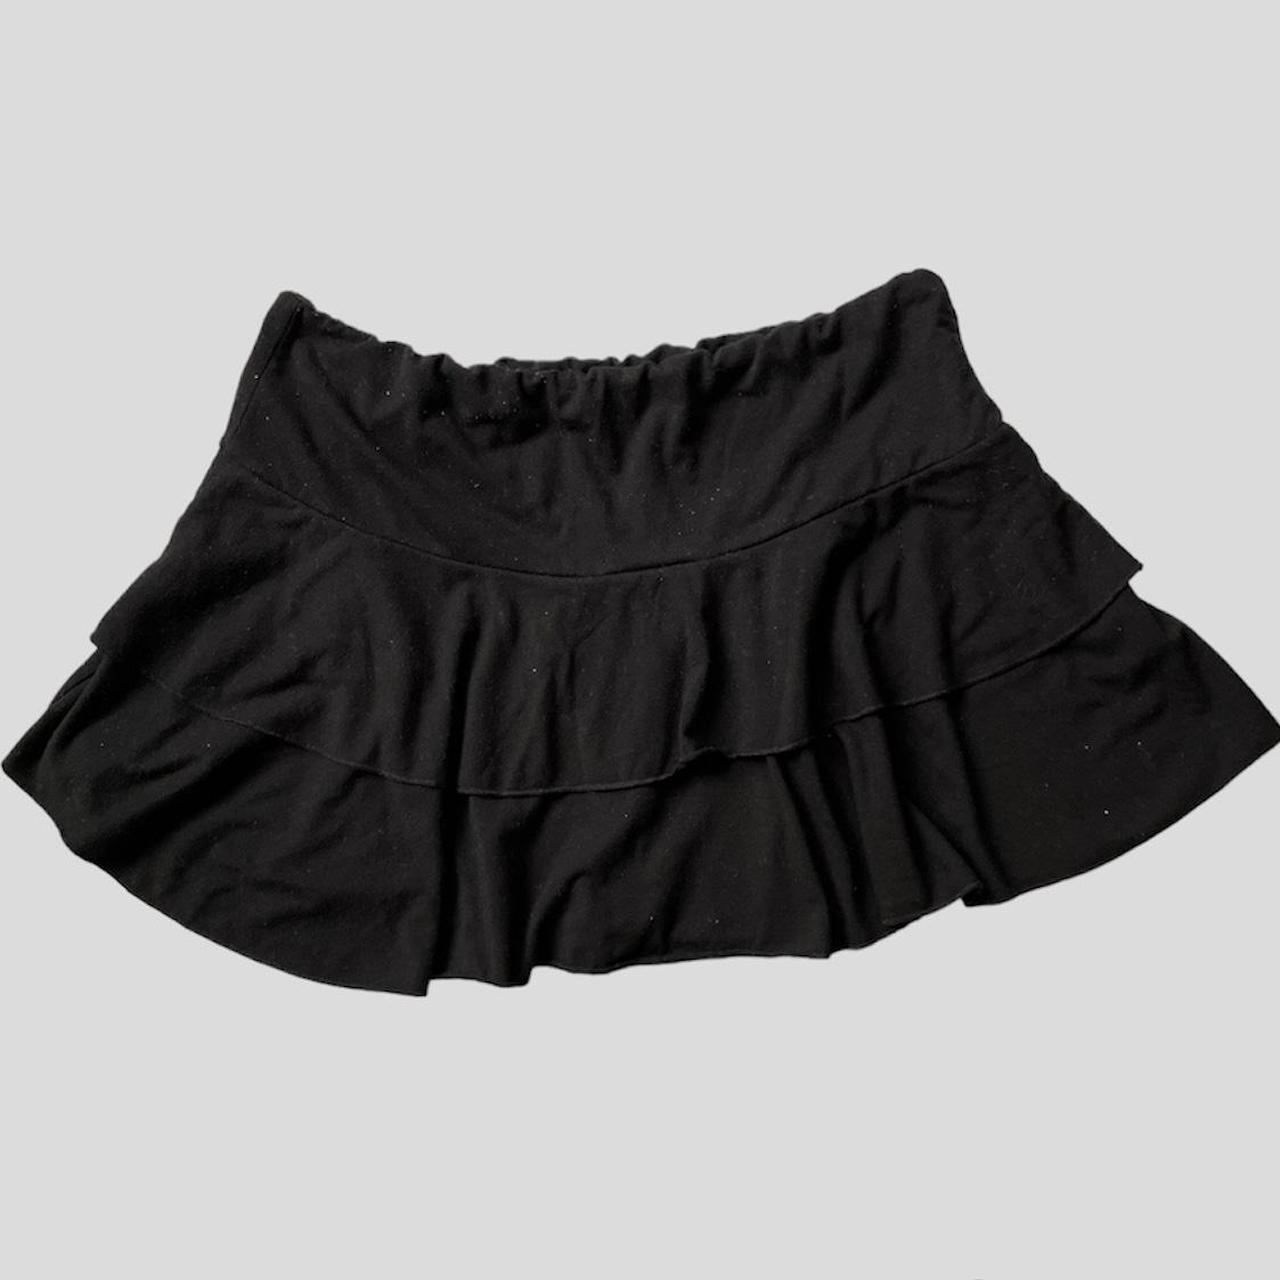 Y2K micro mini skirt by Tyte featuring a low elastic... - Depop